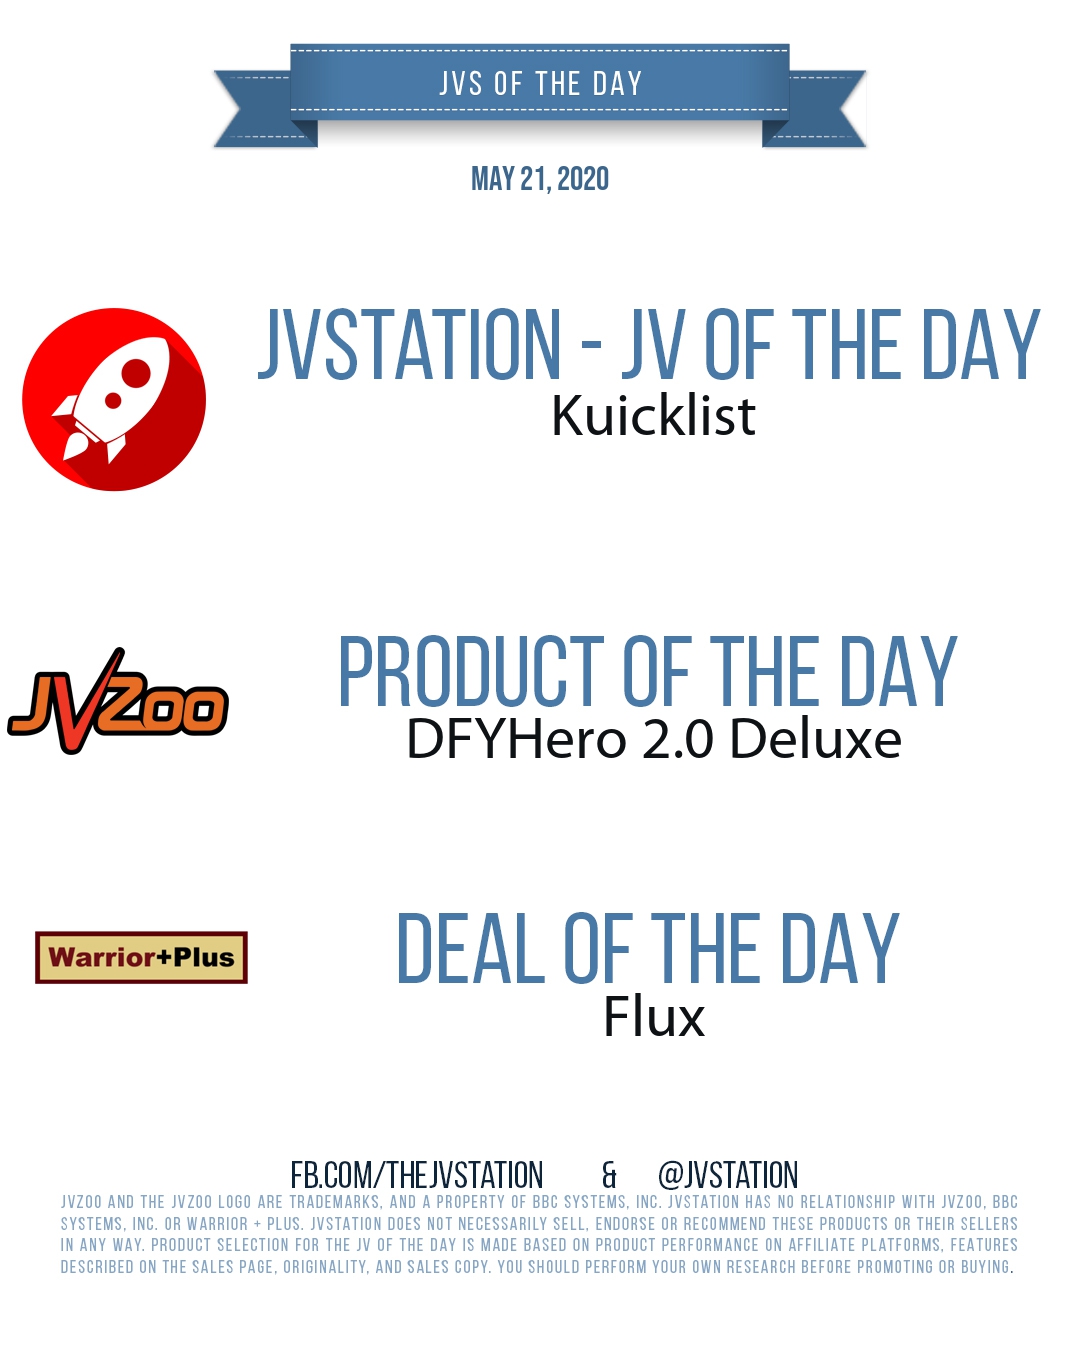 JVs of the day - May 21, 2020